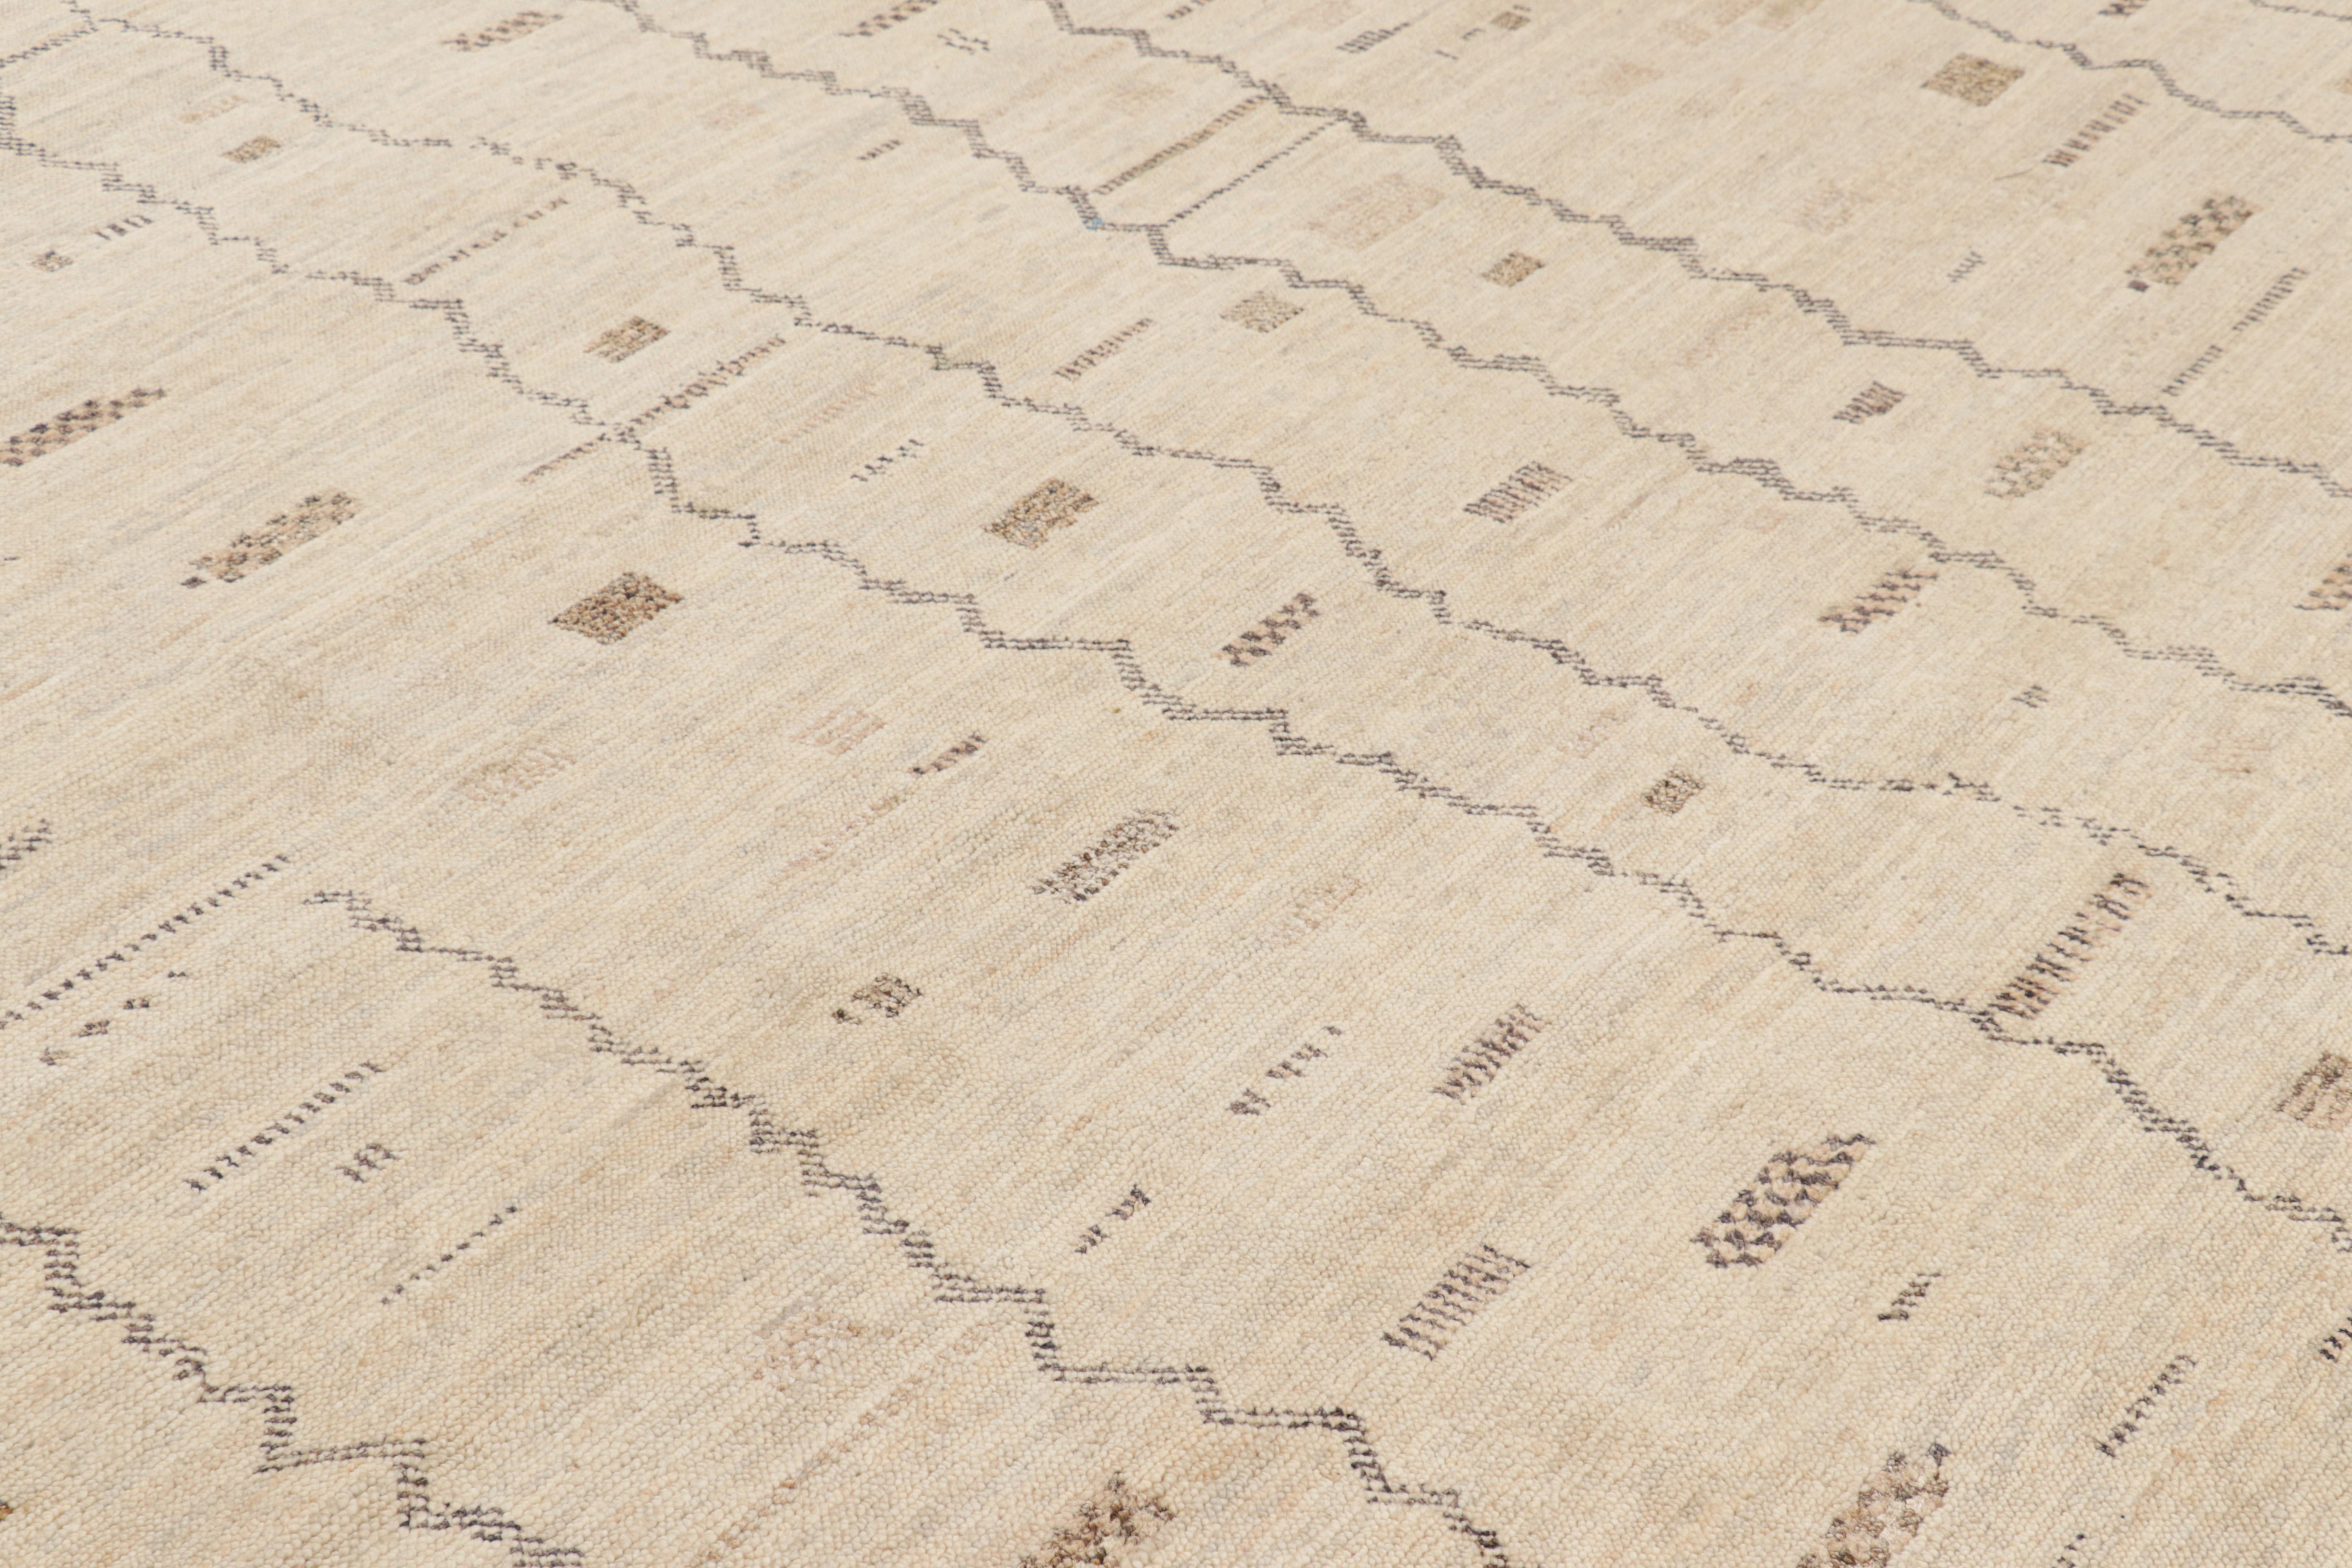 Hand-knotted in wool, this 8x10 contemporary Moroccan style rug features a ribbed texture and geometric patterns inspired by the primitivist Berber weaving traditions. 

On the Design: 

Connoisseurs may admire the subtle appeal of the rug that